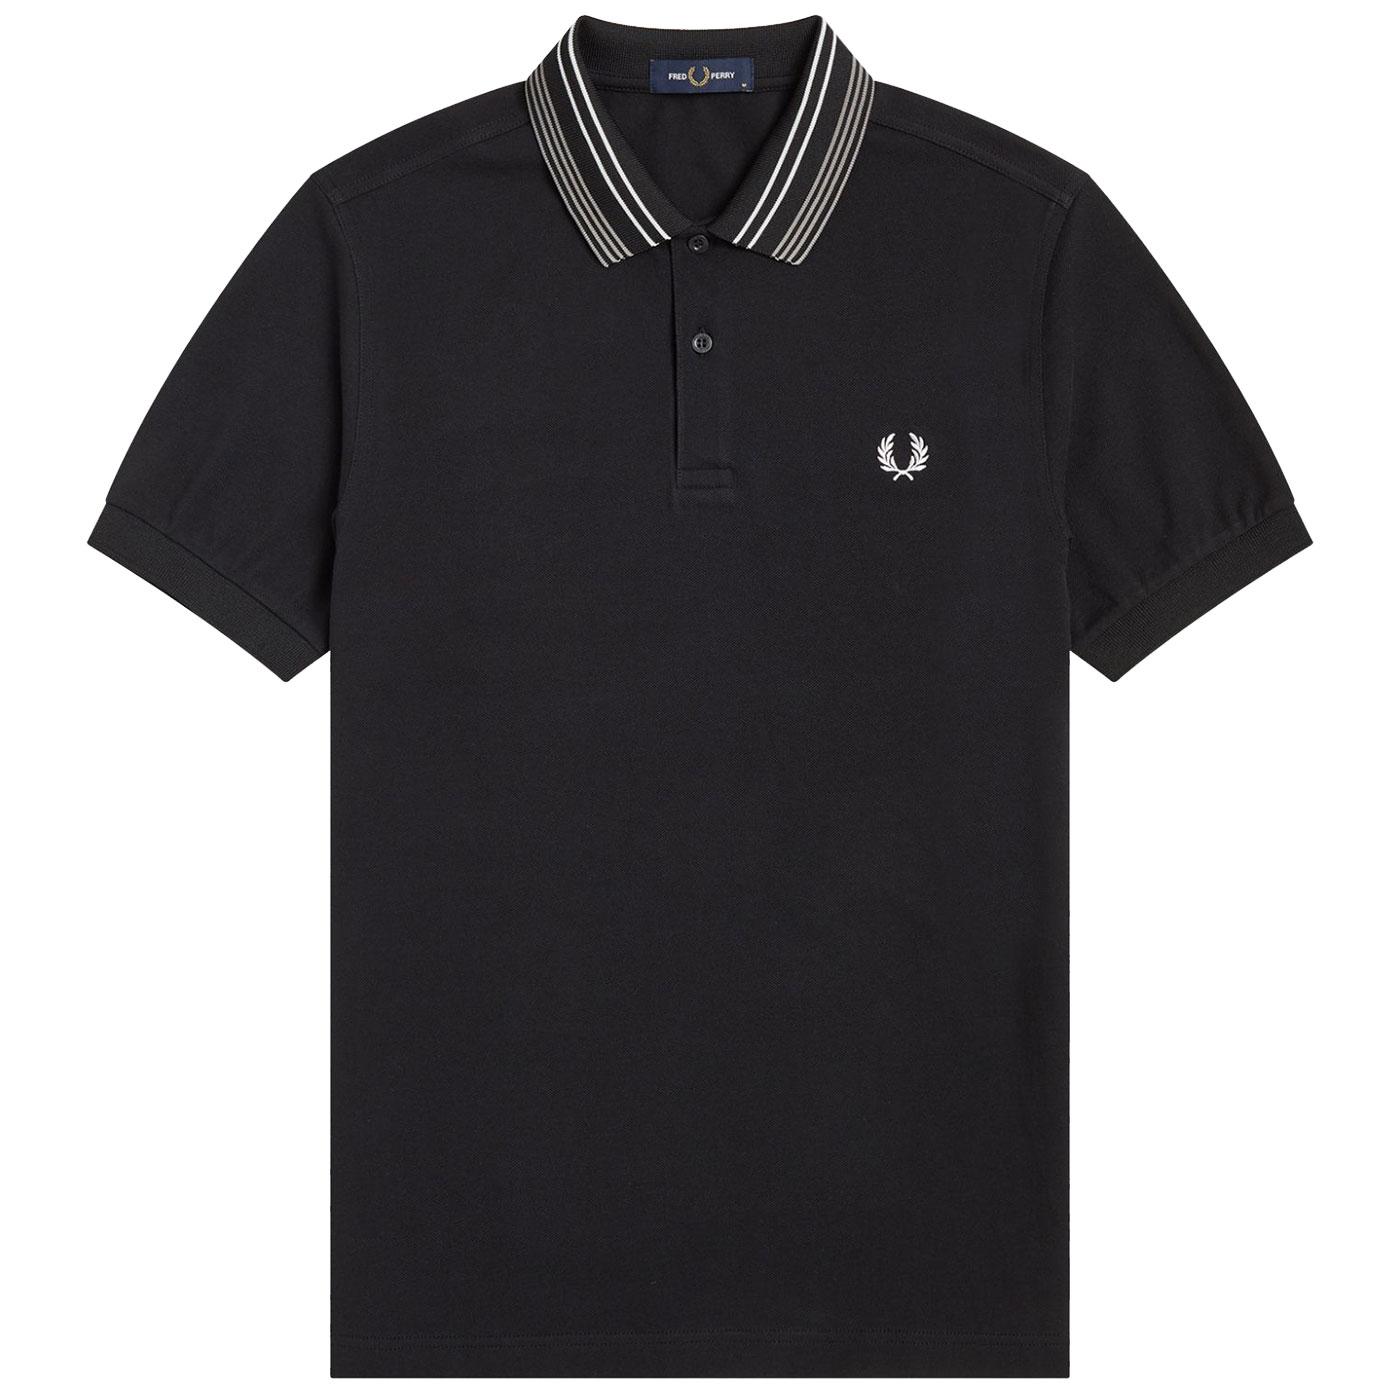 FRED PERRY Stripe Collar Mod Pique Polo Shirt in Black